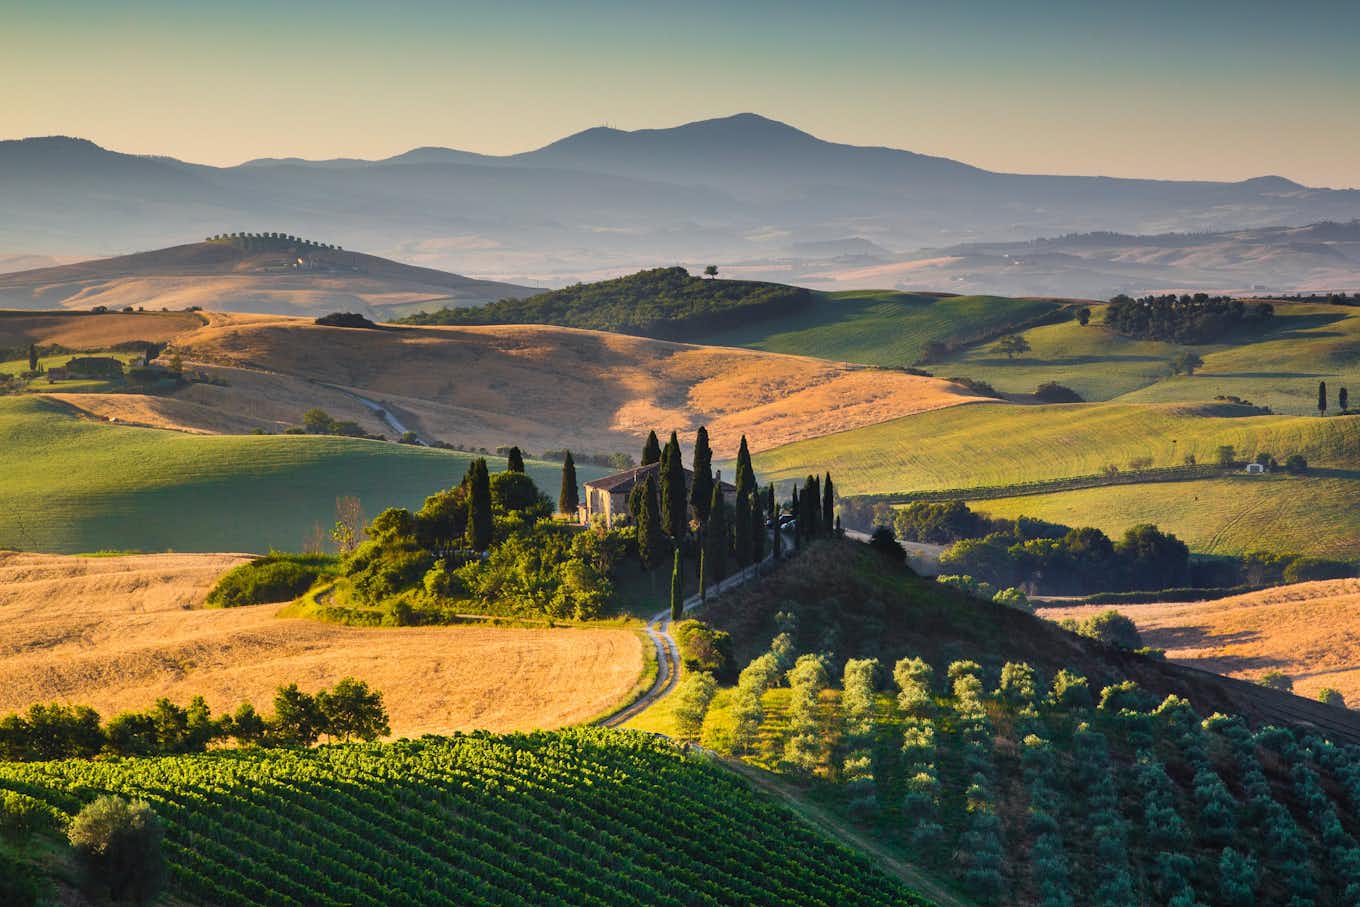 The hills of Tuscany during sunset